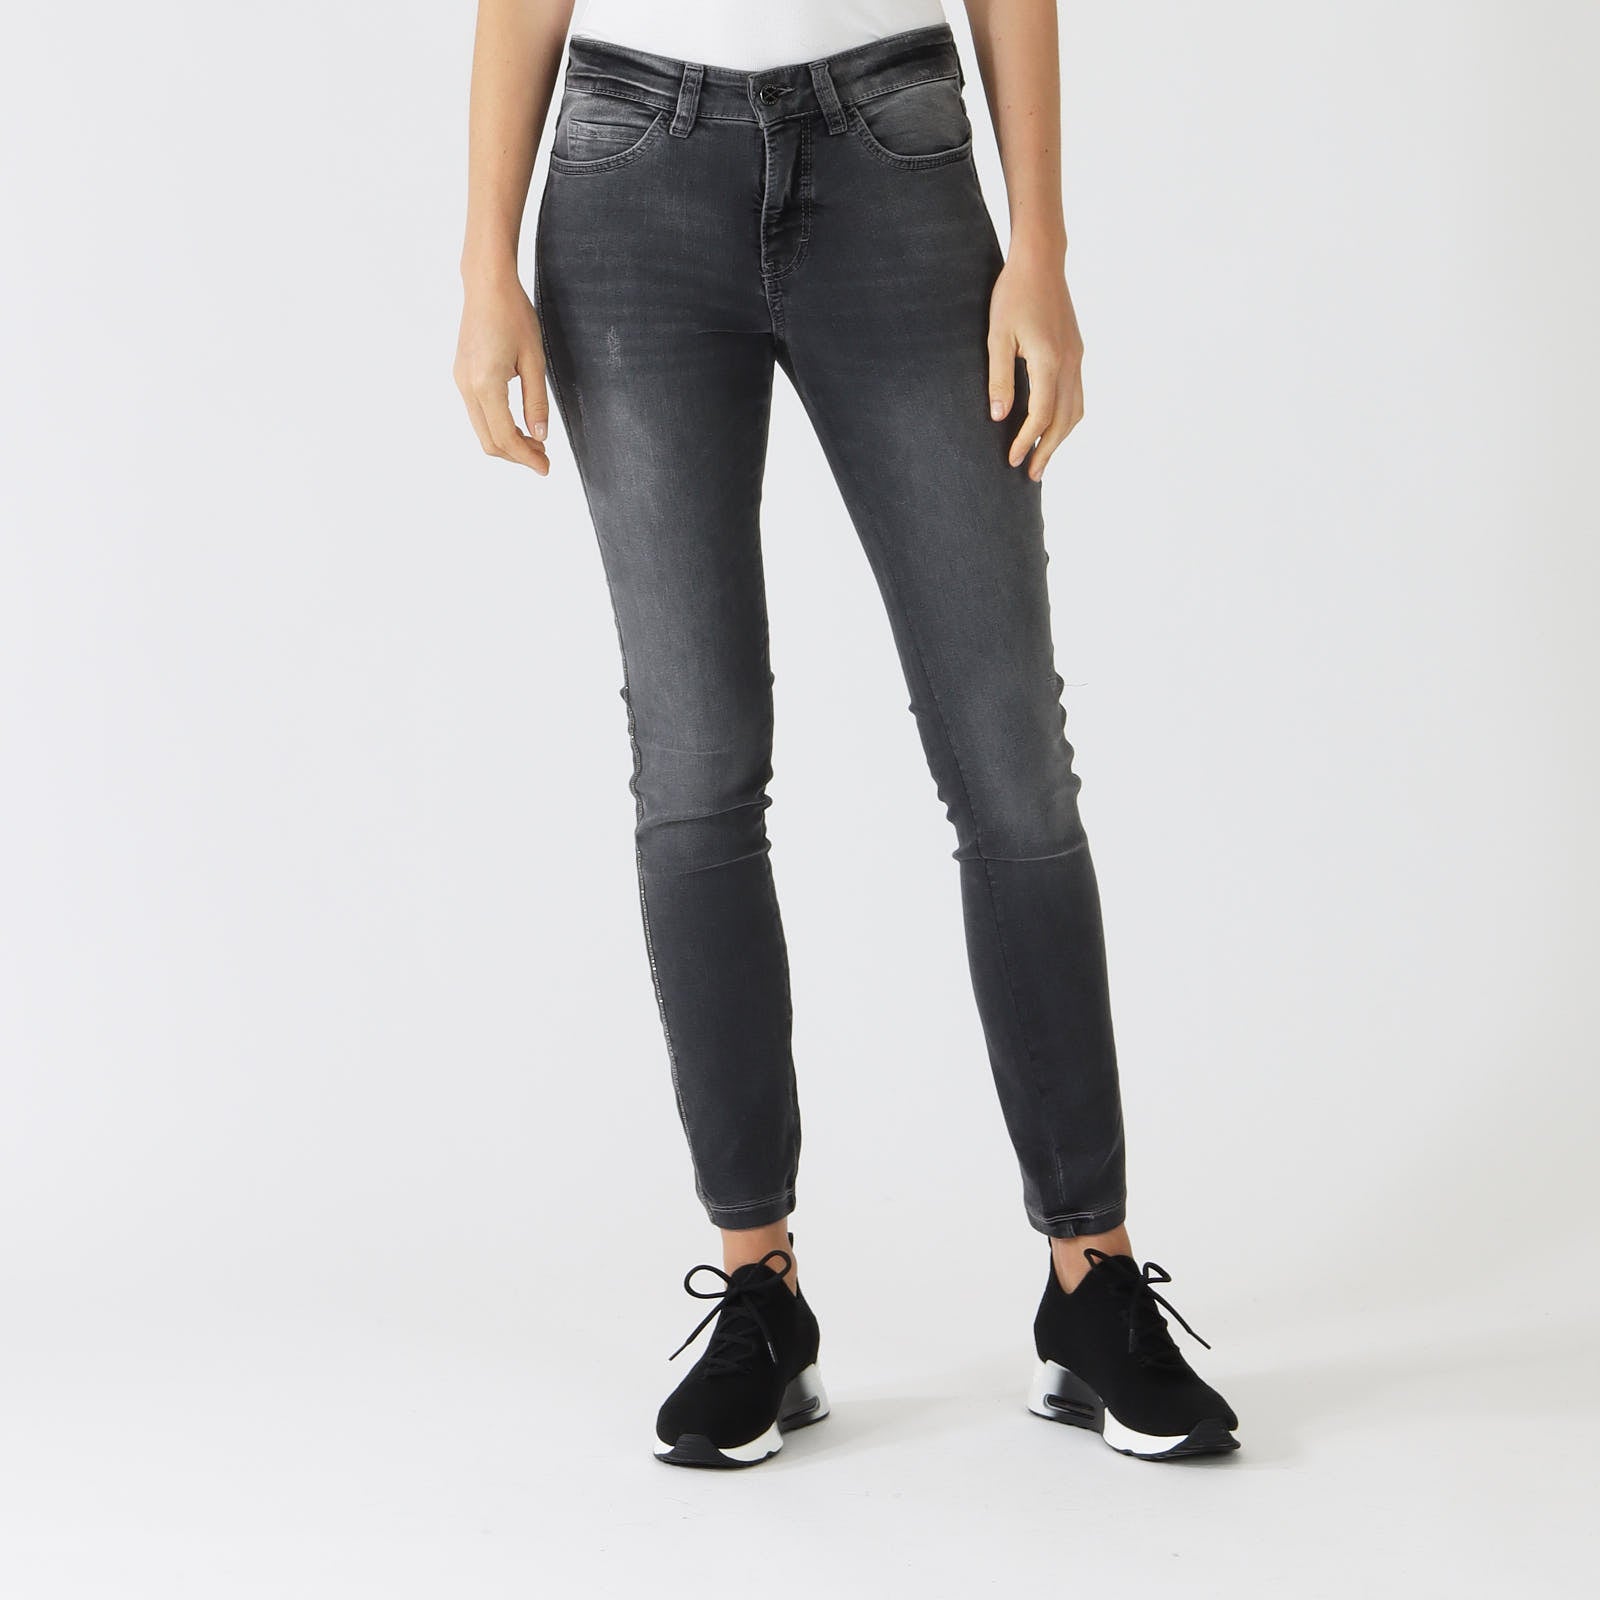 Light Anthracite Dream Skinny Chain Jeans